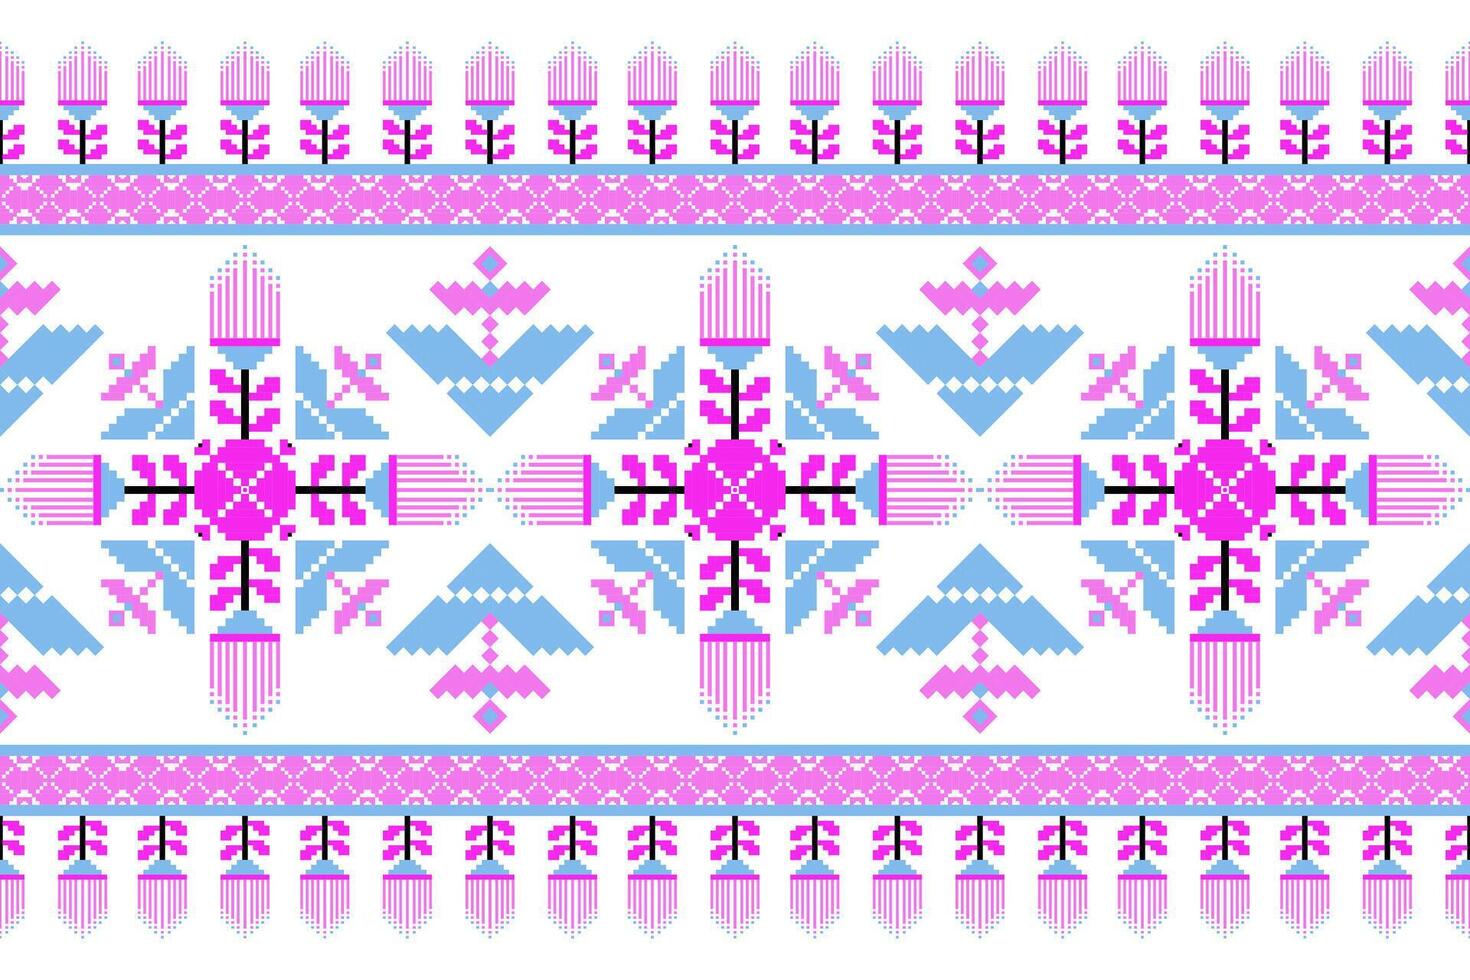 Geometric ethnic oriental seamless pattern. Axtec style embroidery floral pixel art background design for fabric, clothing, textile, scarf, wallpaper, table runner, wrapping, print, sarong vector